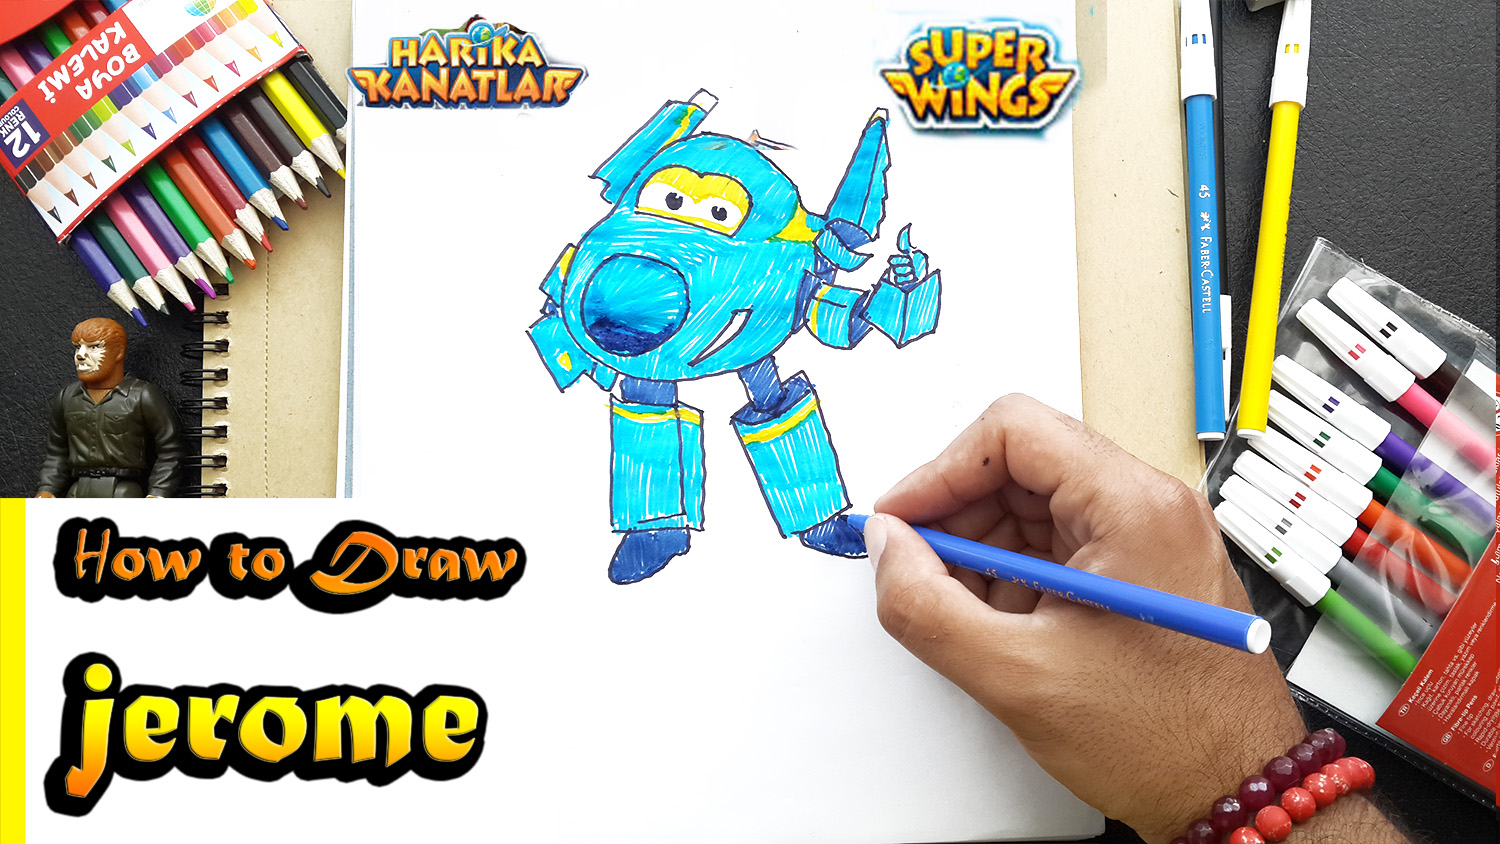 How to draw superwings draw step by step tutorial funny art basic kids draw lets art do